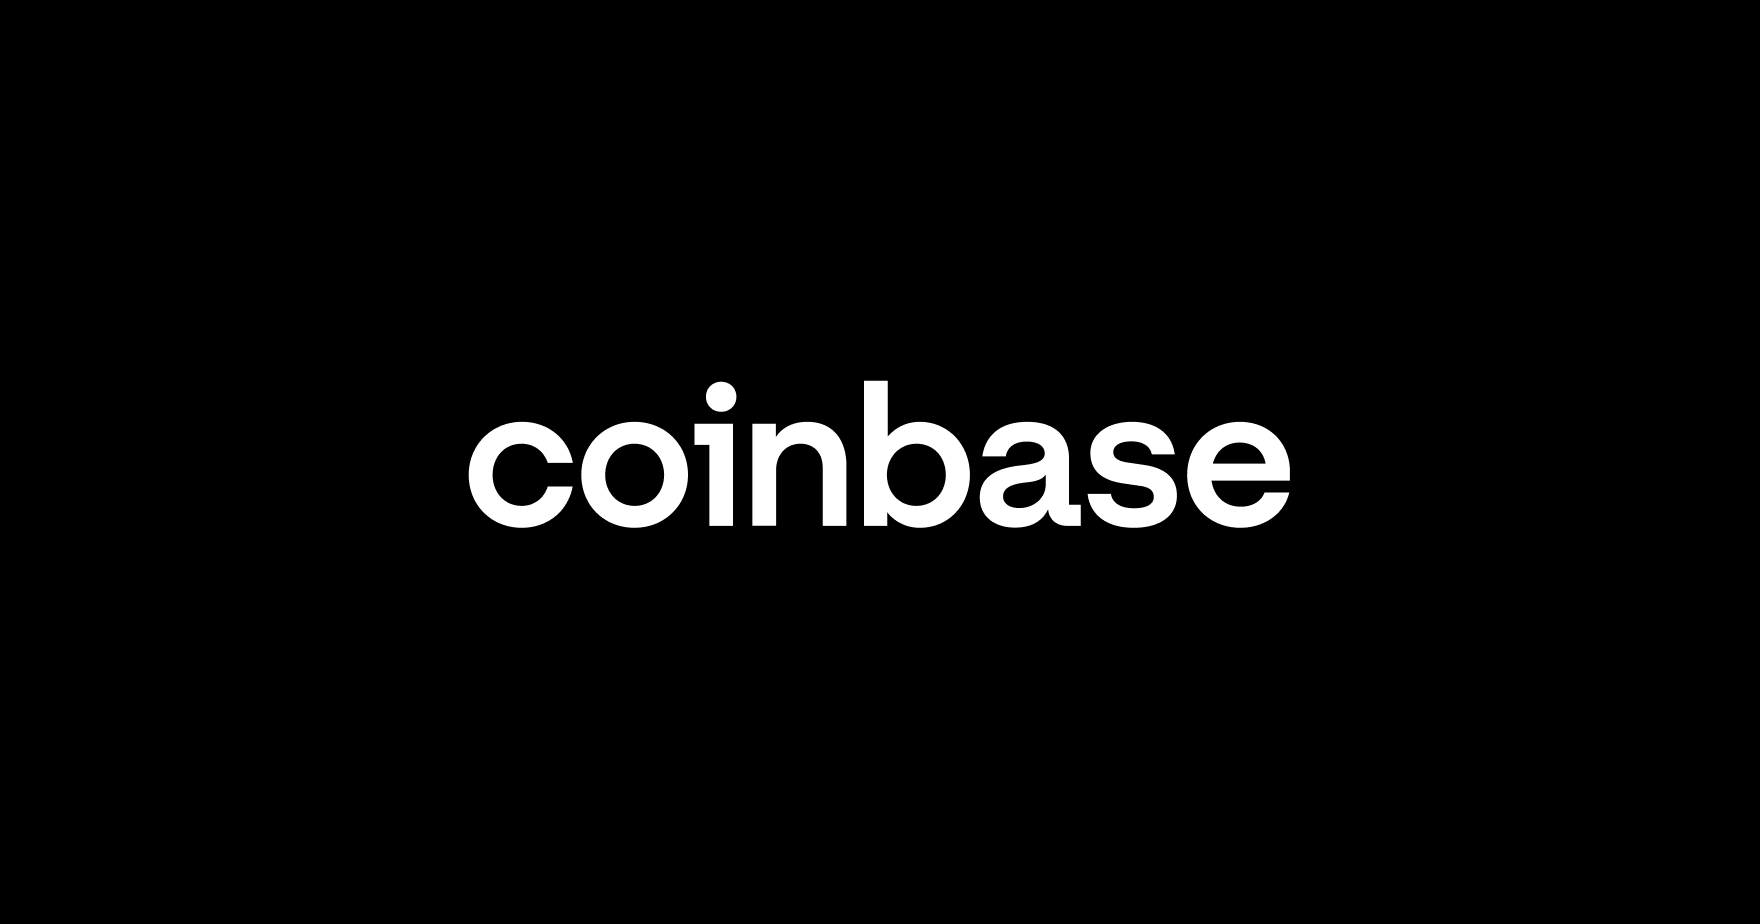 Coinbase does not list securities. End of story.